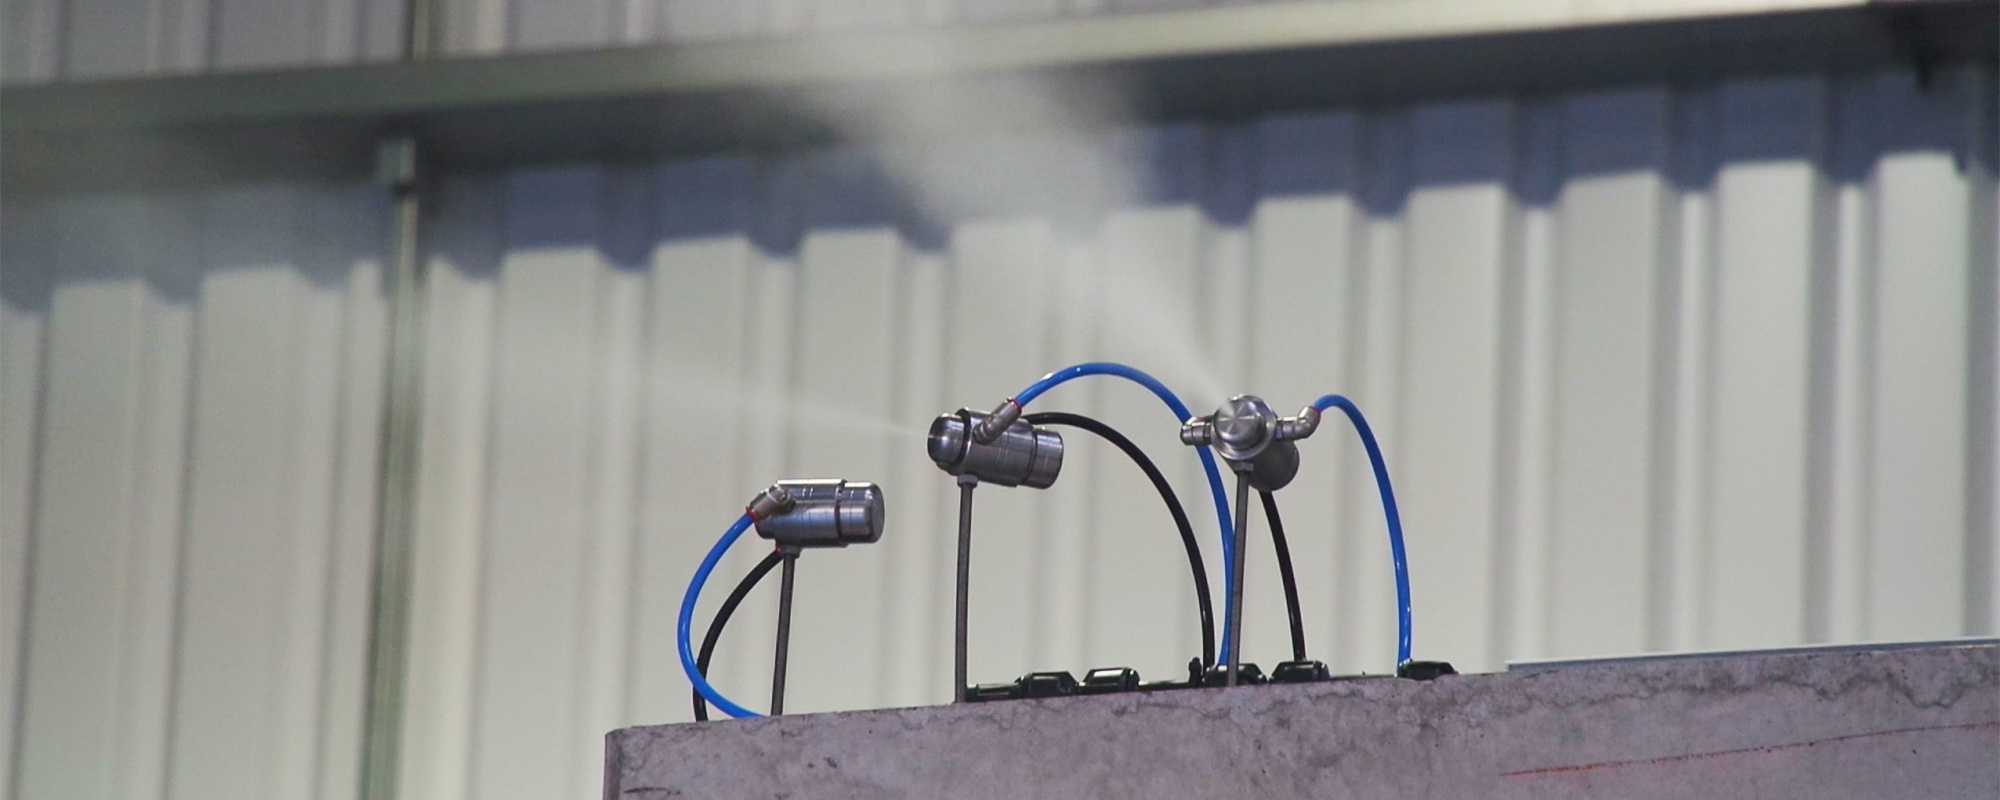 3 AtomisterAiro nozzles mounted on top of a wall spraying a very fine mist